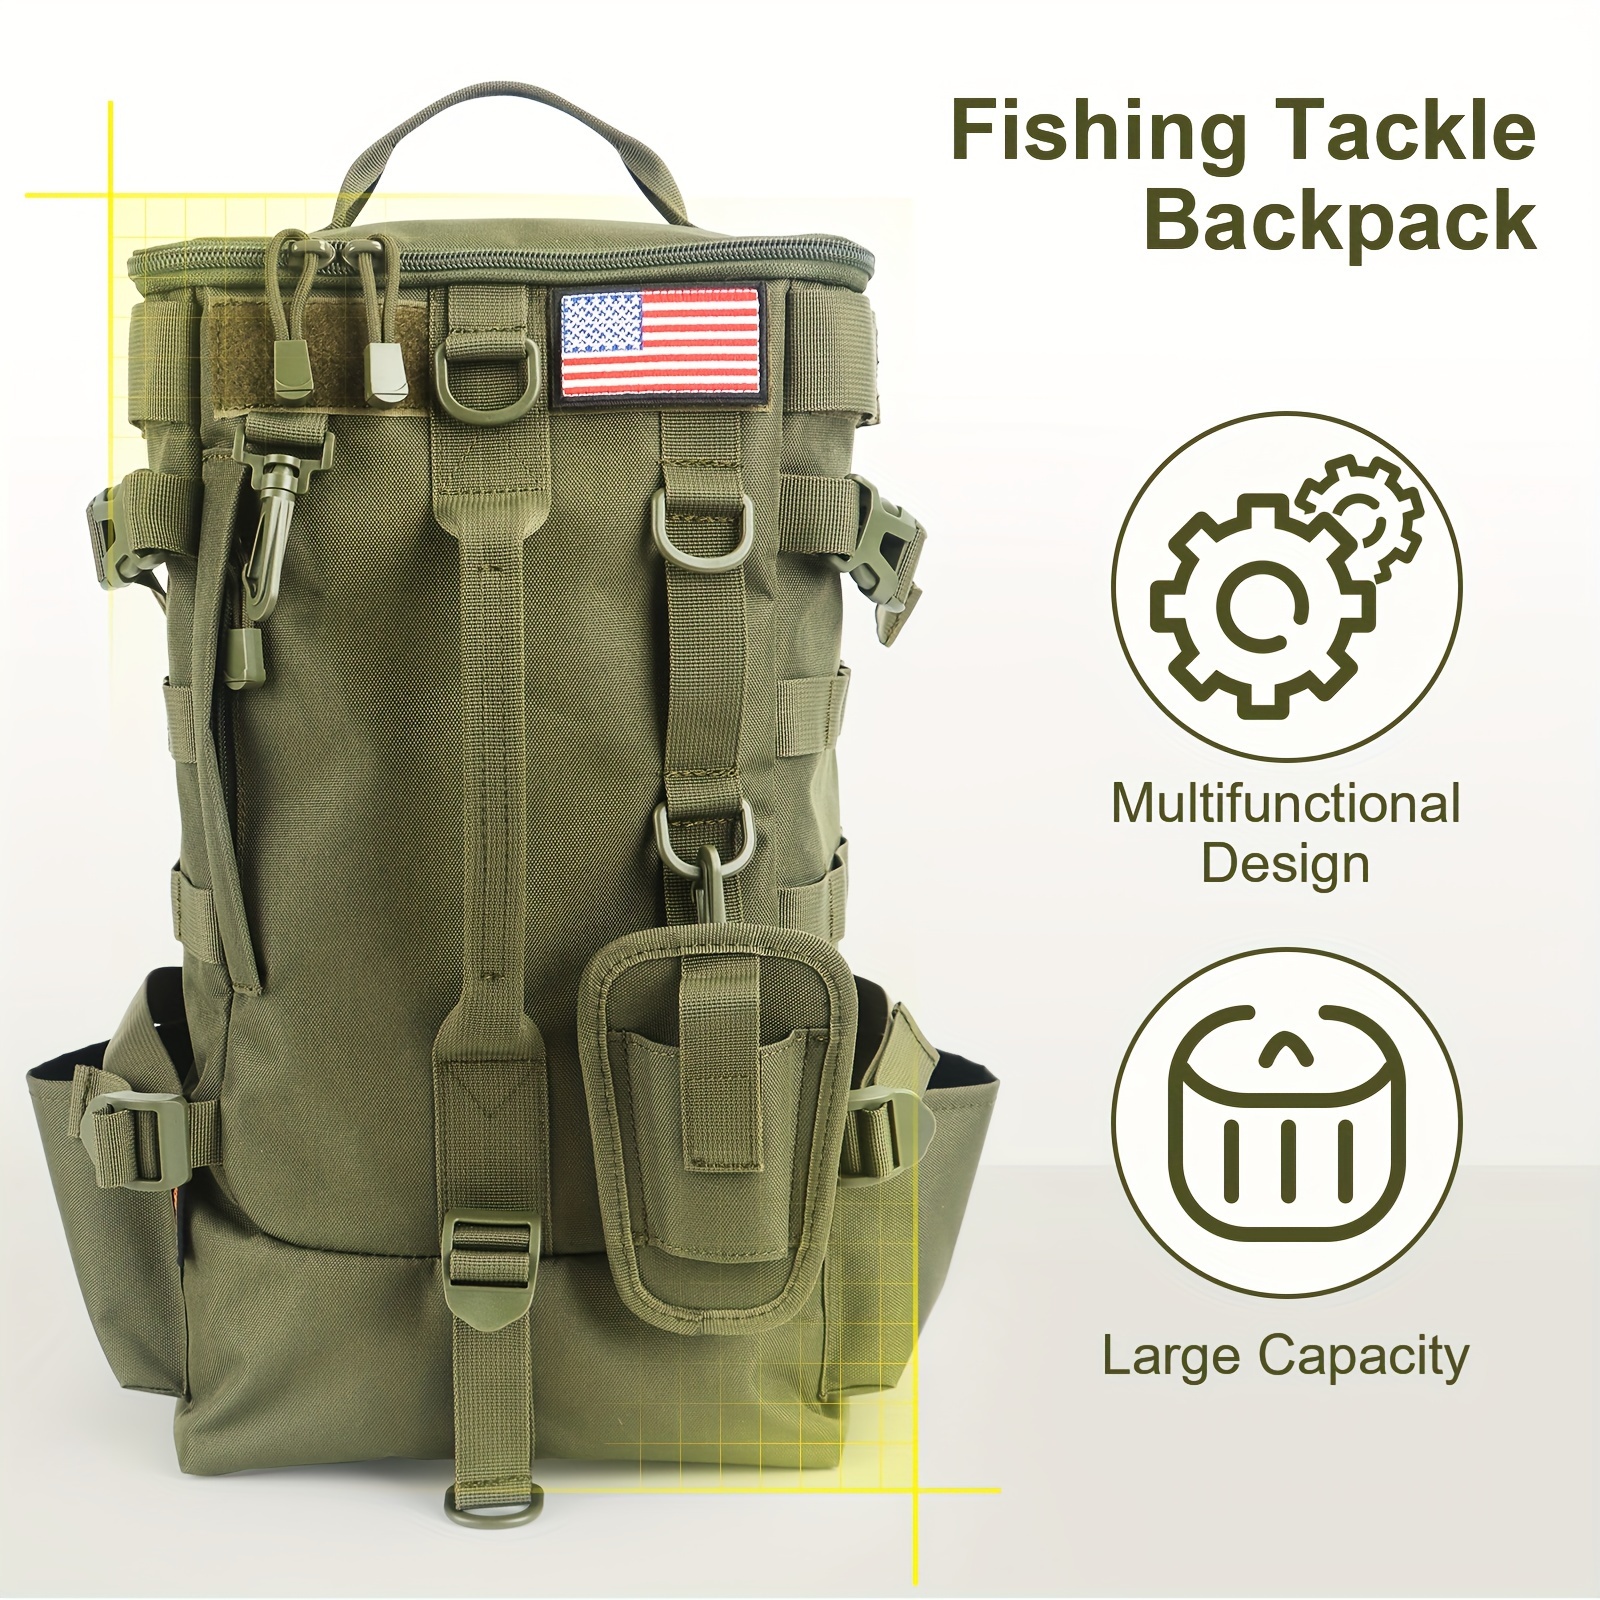 Bulk Buy China Wholesale Fishing Tackle Backpack Durable Fishing Bags  Saltwater Resistant Bait Bag Large Fishing Tackle Storage Pack $6.12 from  Quanzhou Gelanni Import And Export Co., Ltd.